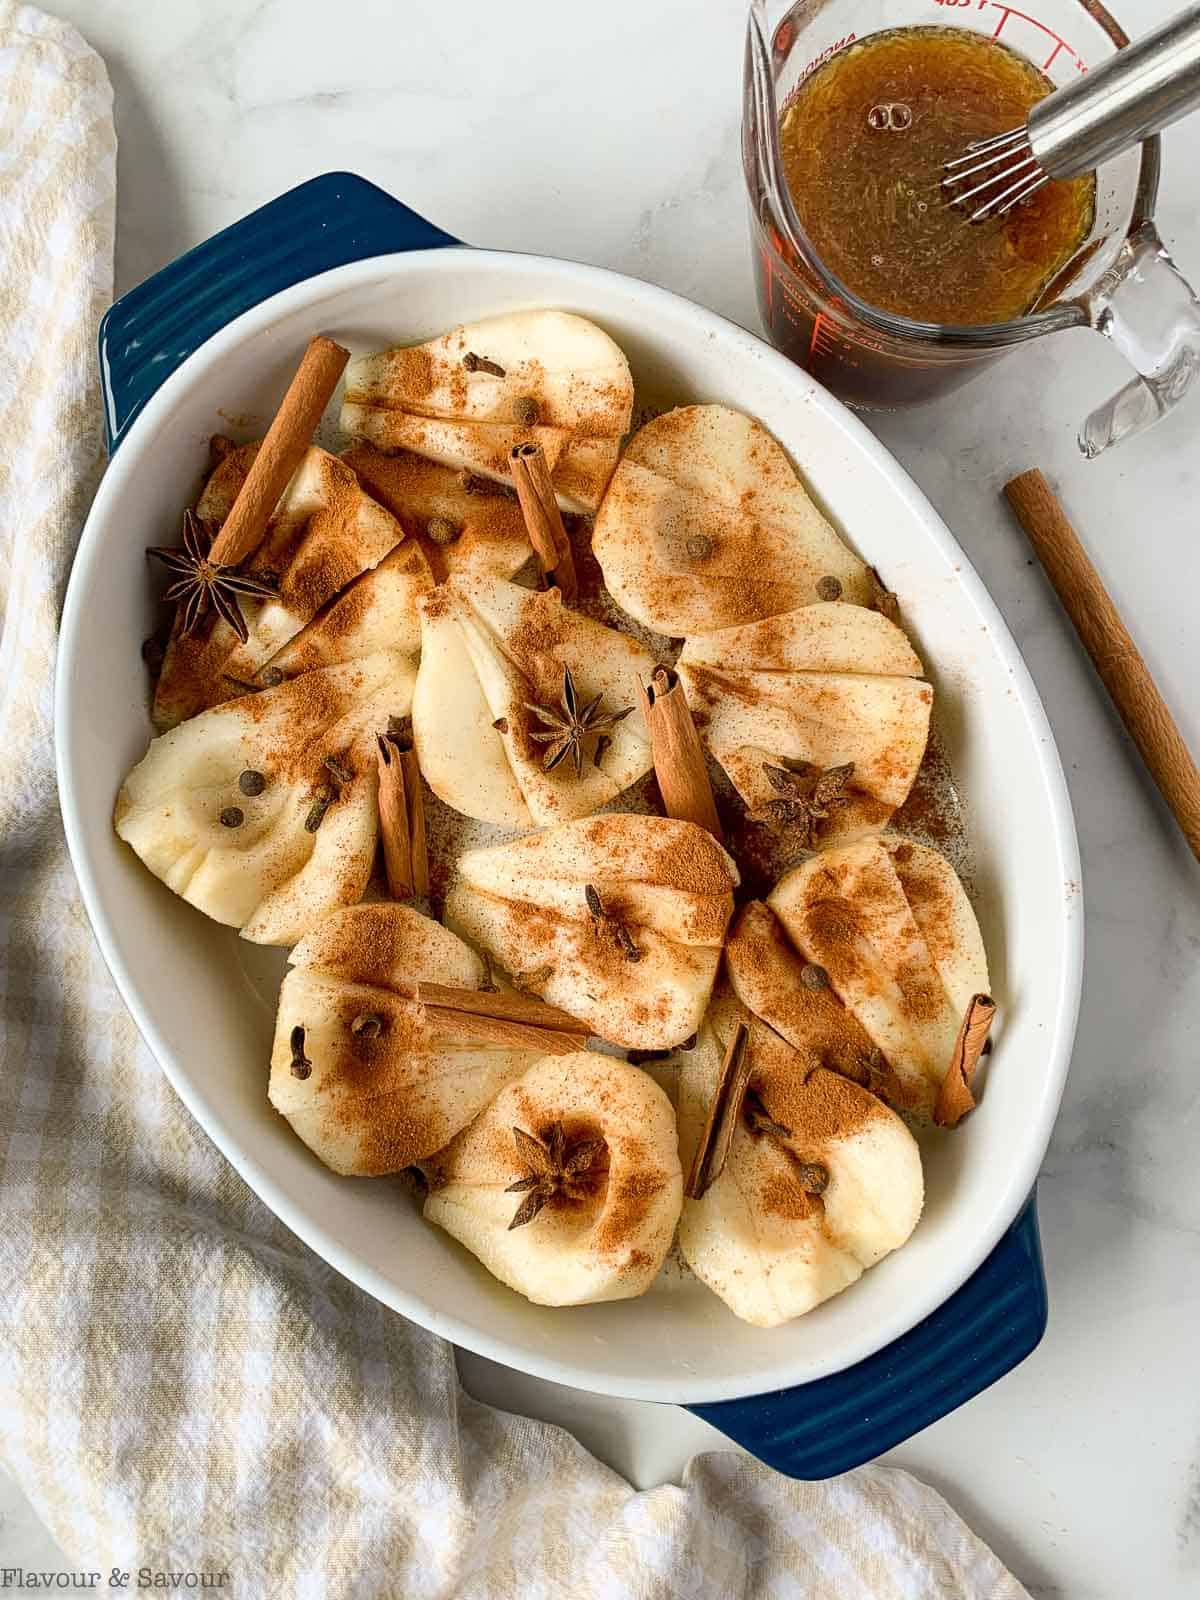 Cinnamon orange pears in a baking dish sprinkled with spices.